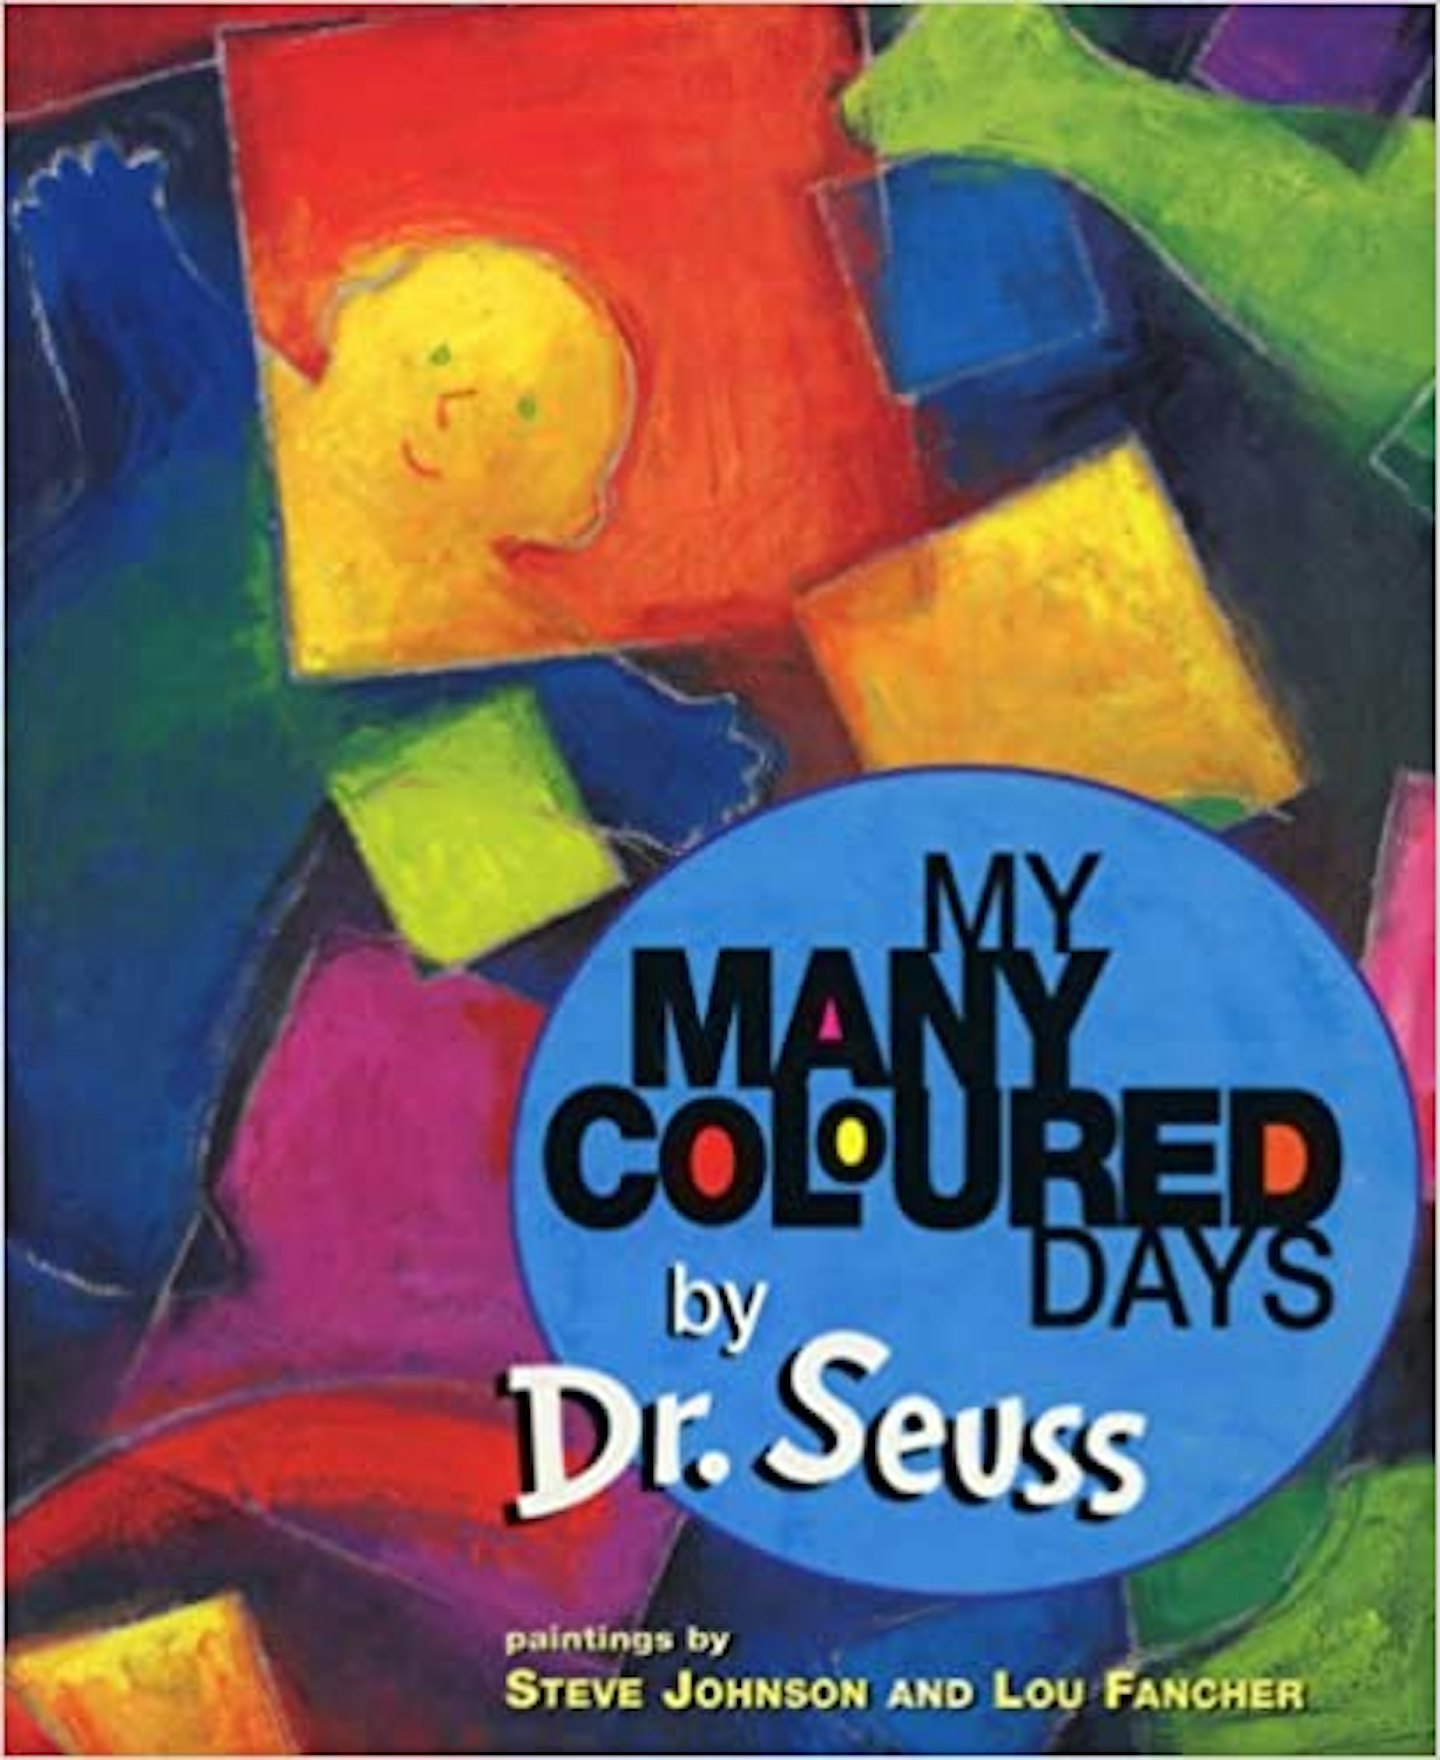 My Many Colored Days – Dr Seuss, Steve Johnson and Lou Fancher 